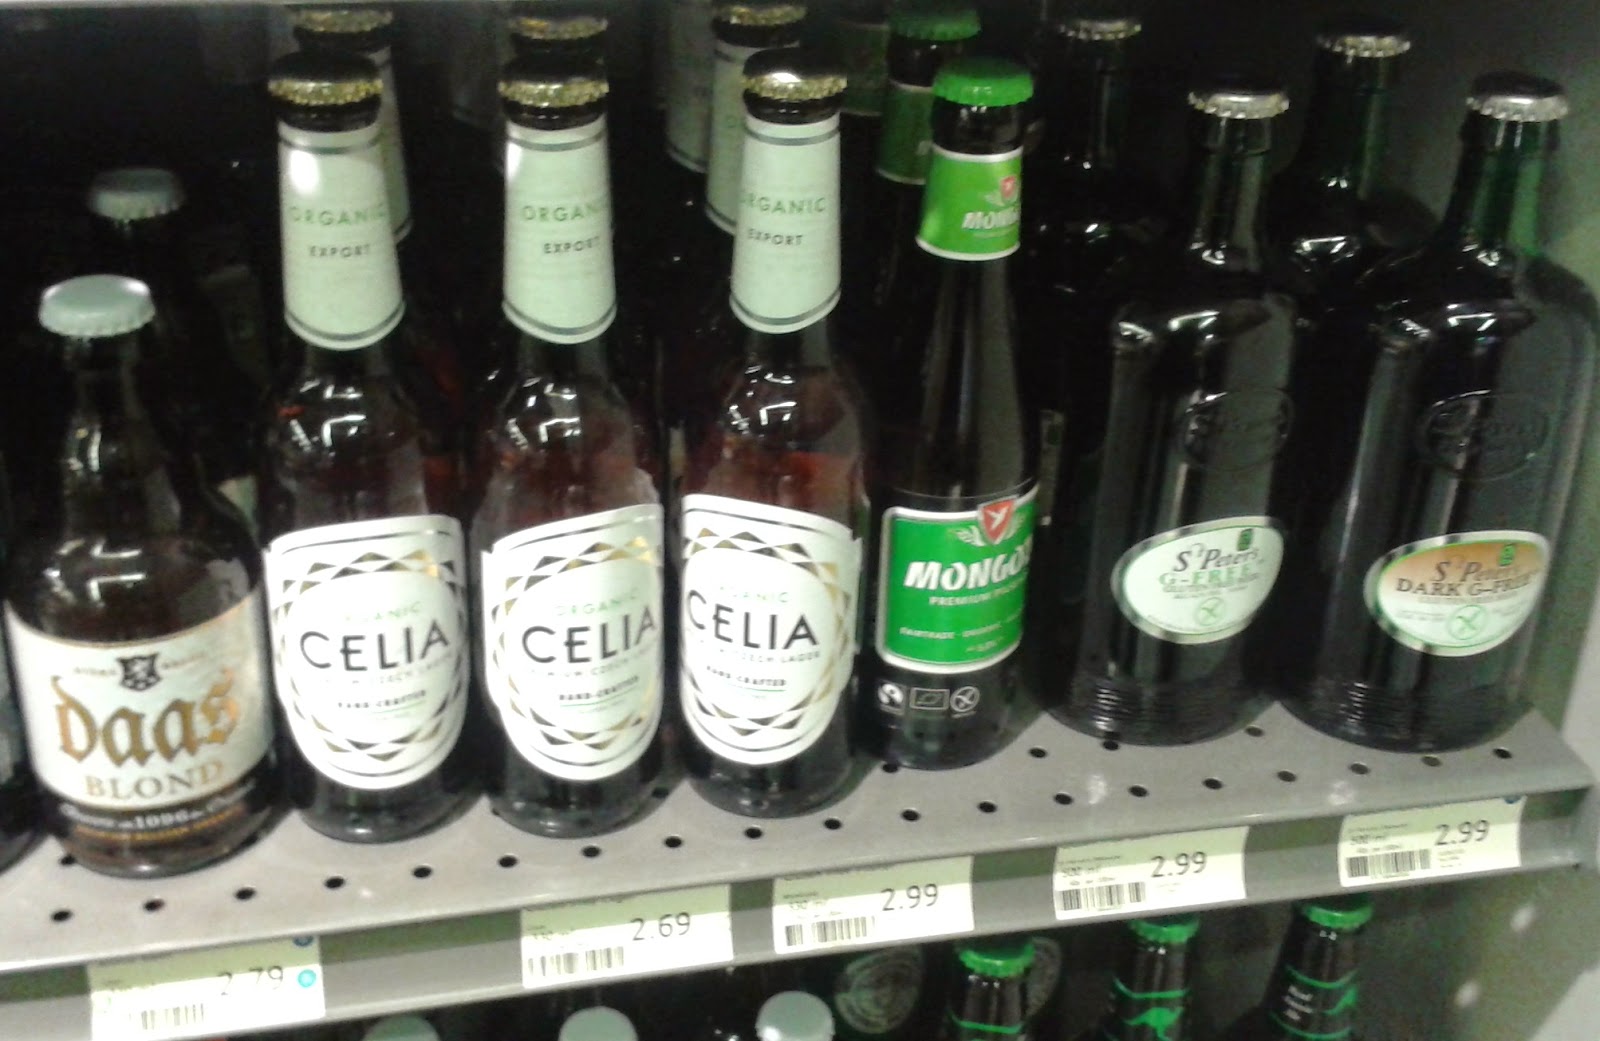 Gluten Free Beer and Lager in Whole Foods Market Piccadilly